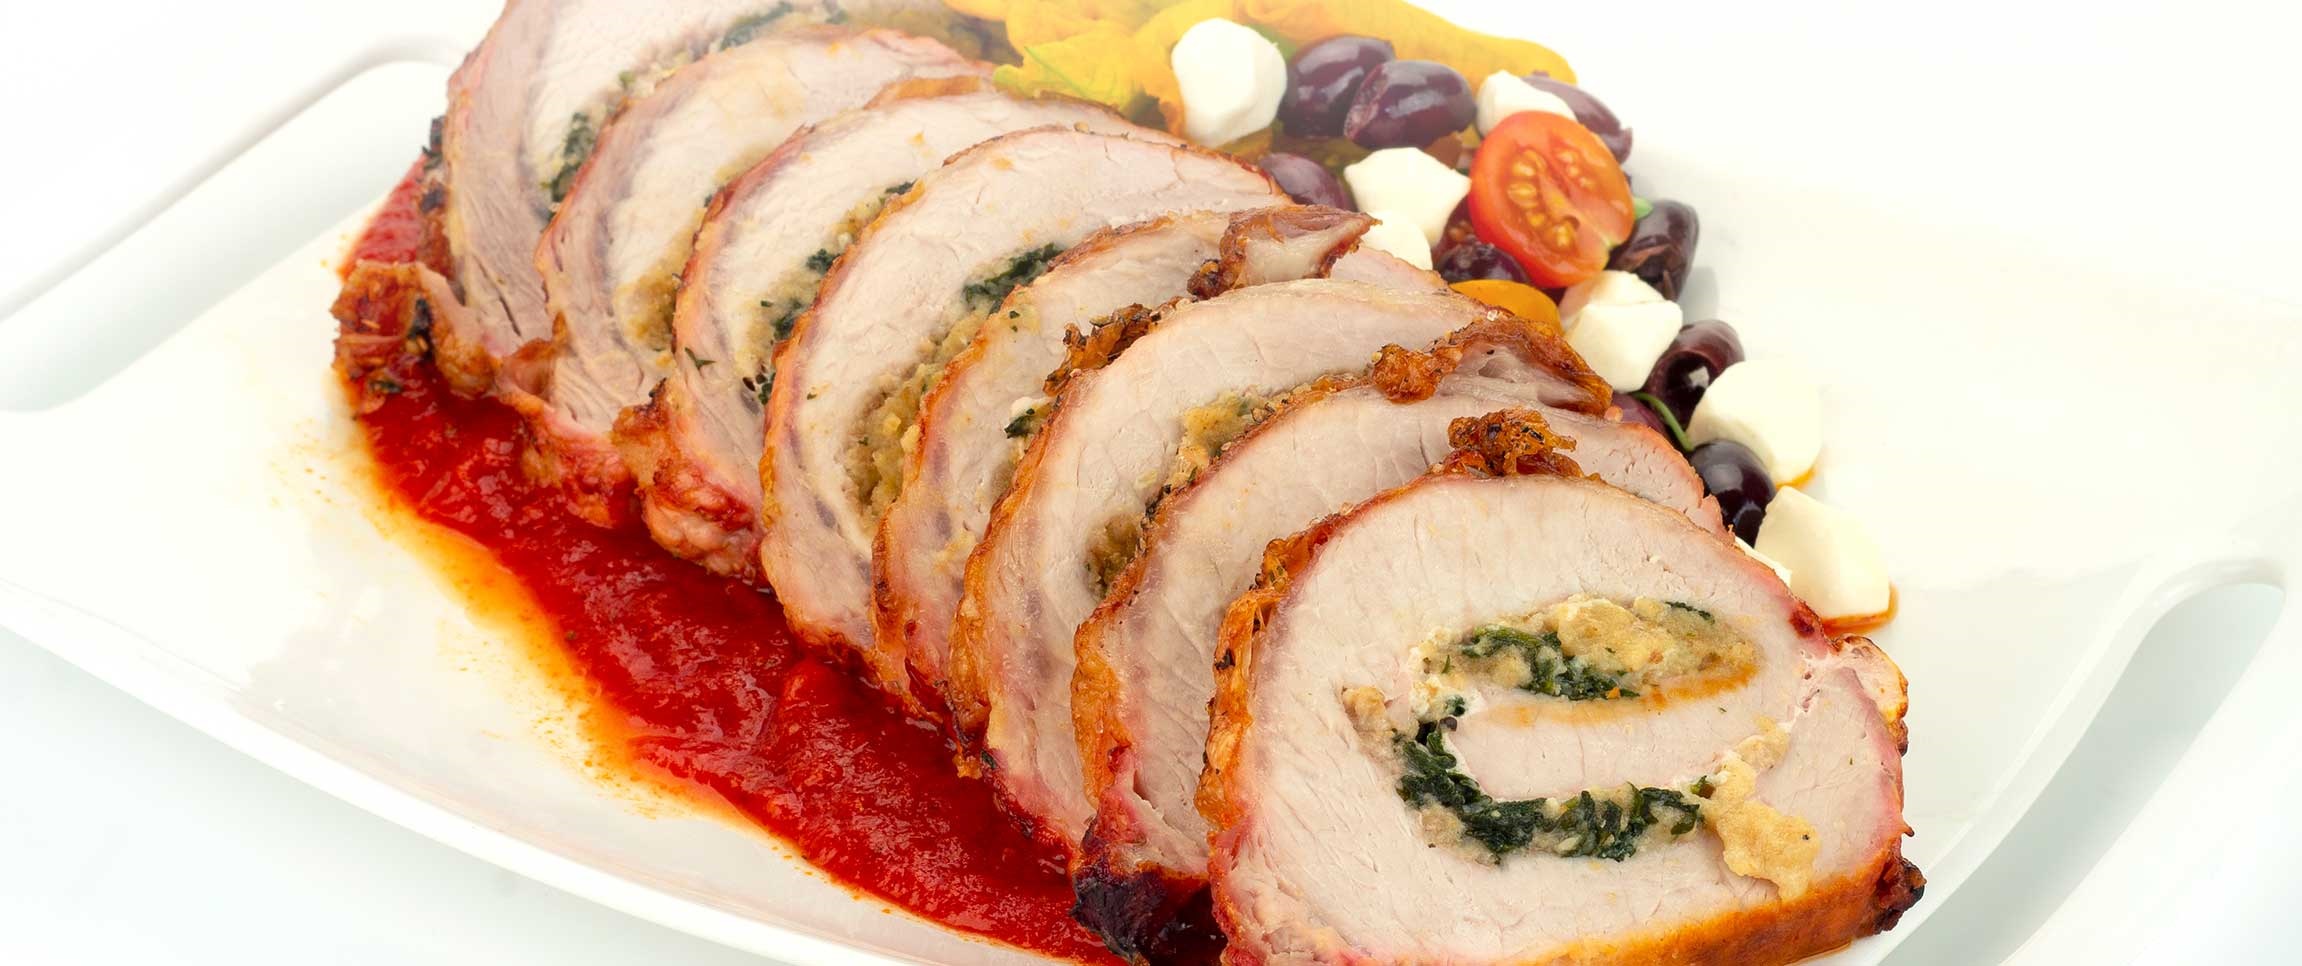 Stuffed and Rolled Pork Loin